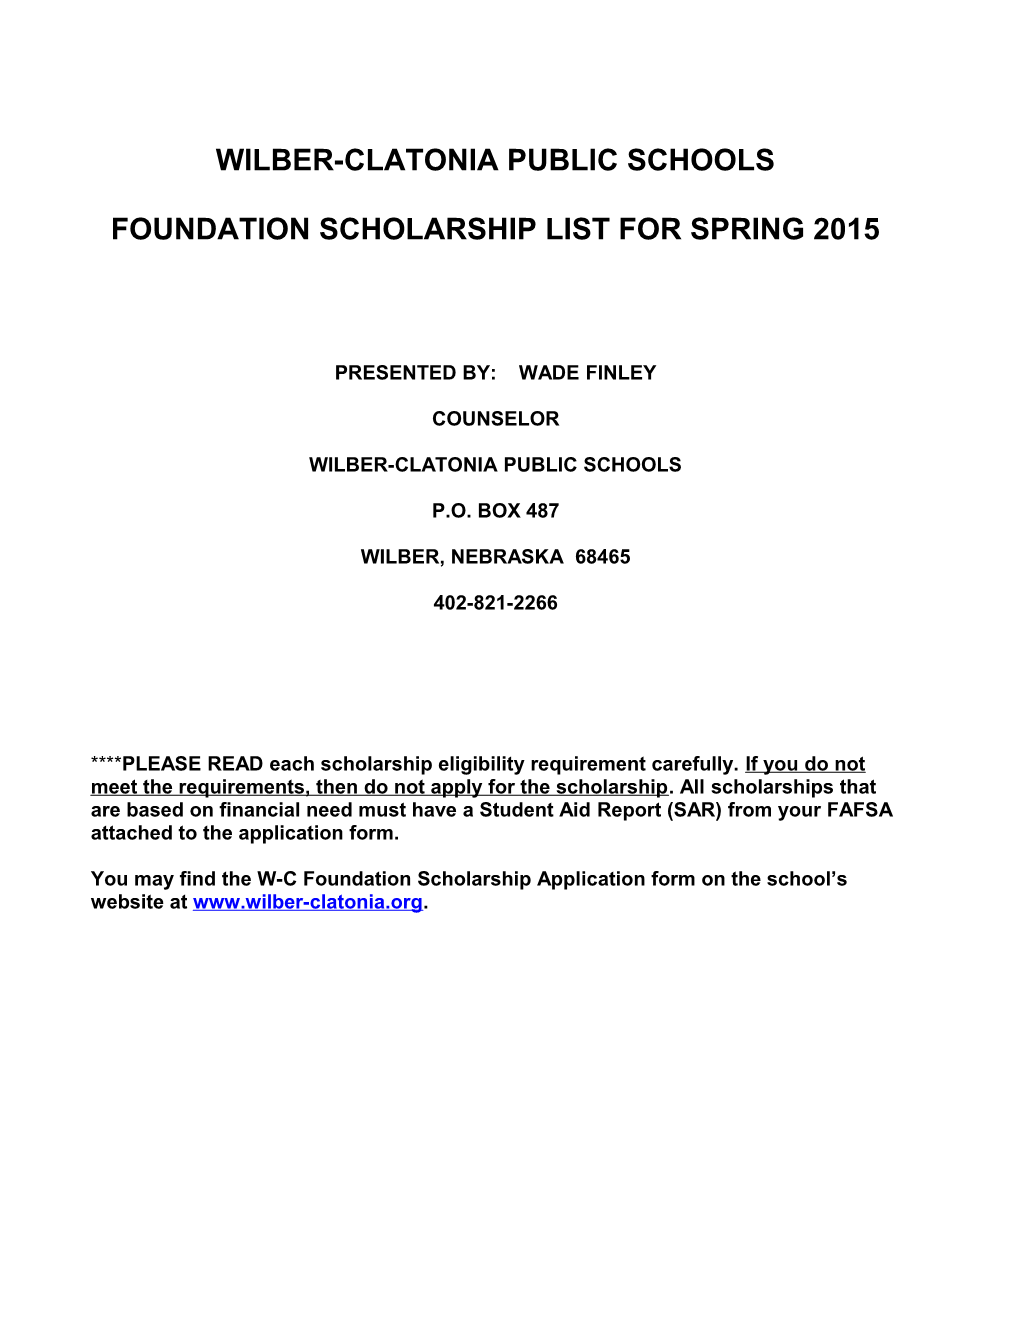 Local Scholarship List for Spring 1998